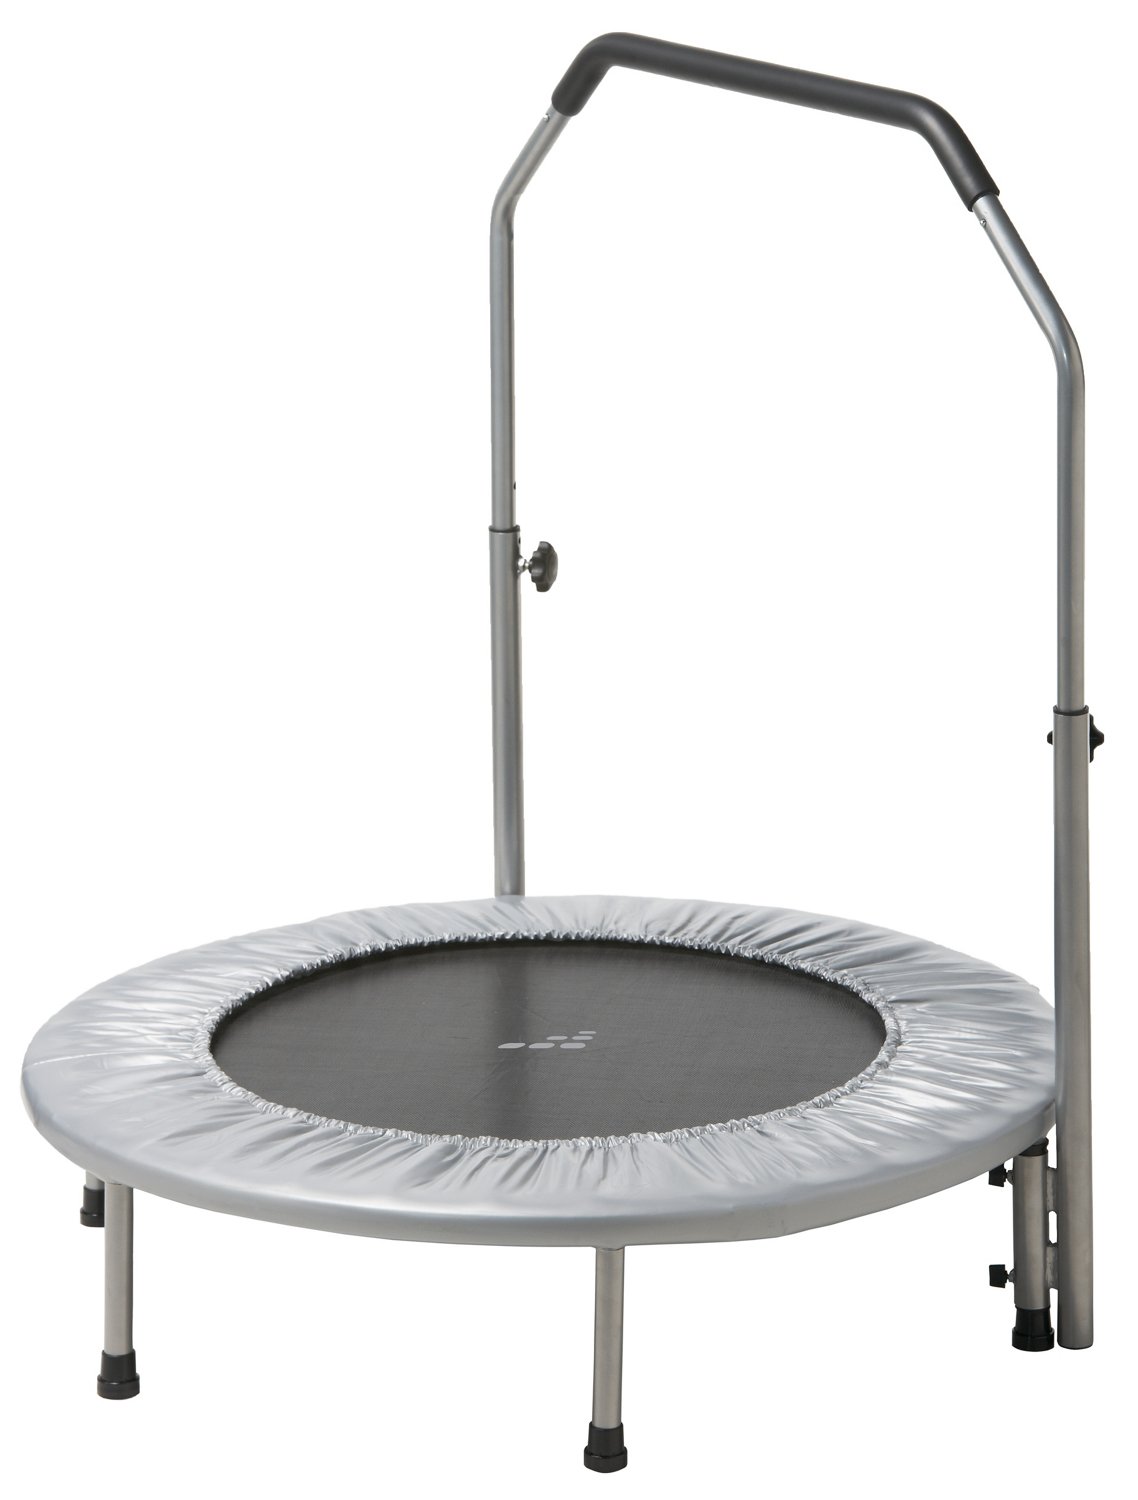 BCG Adults' Aerobic Rebounder                                                                                                    - view number 1 selected